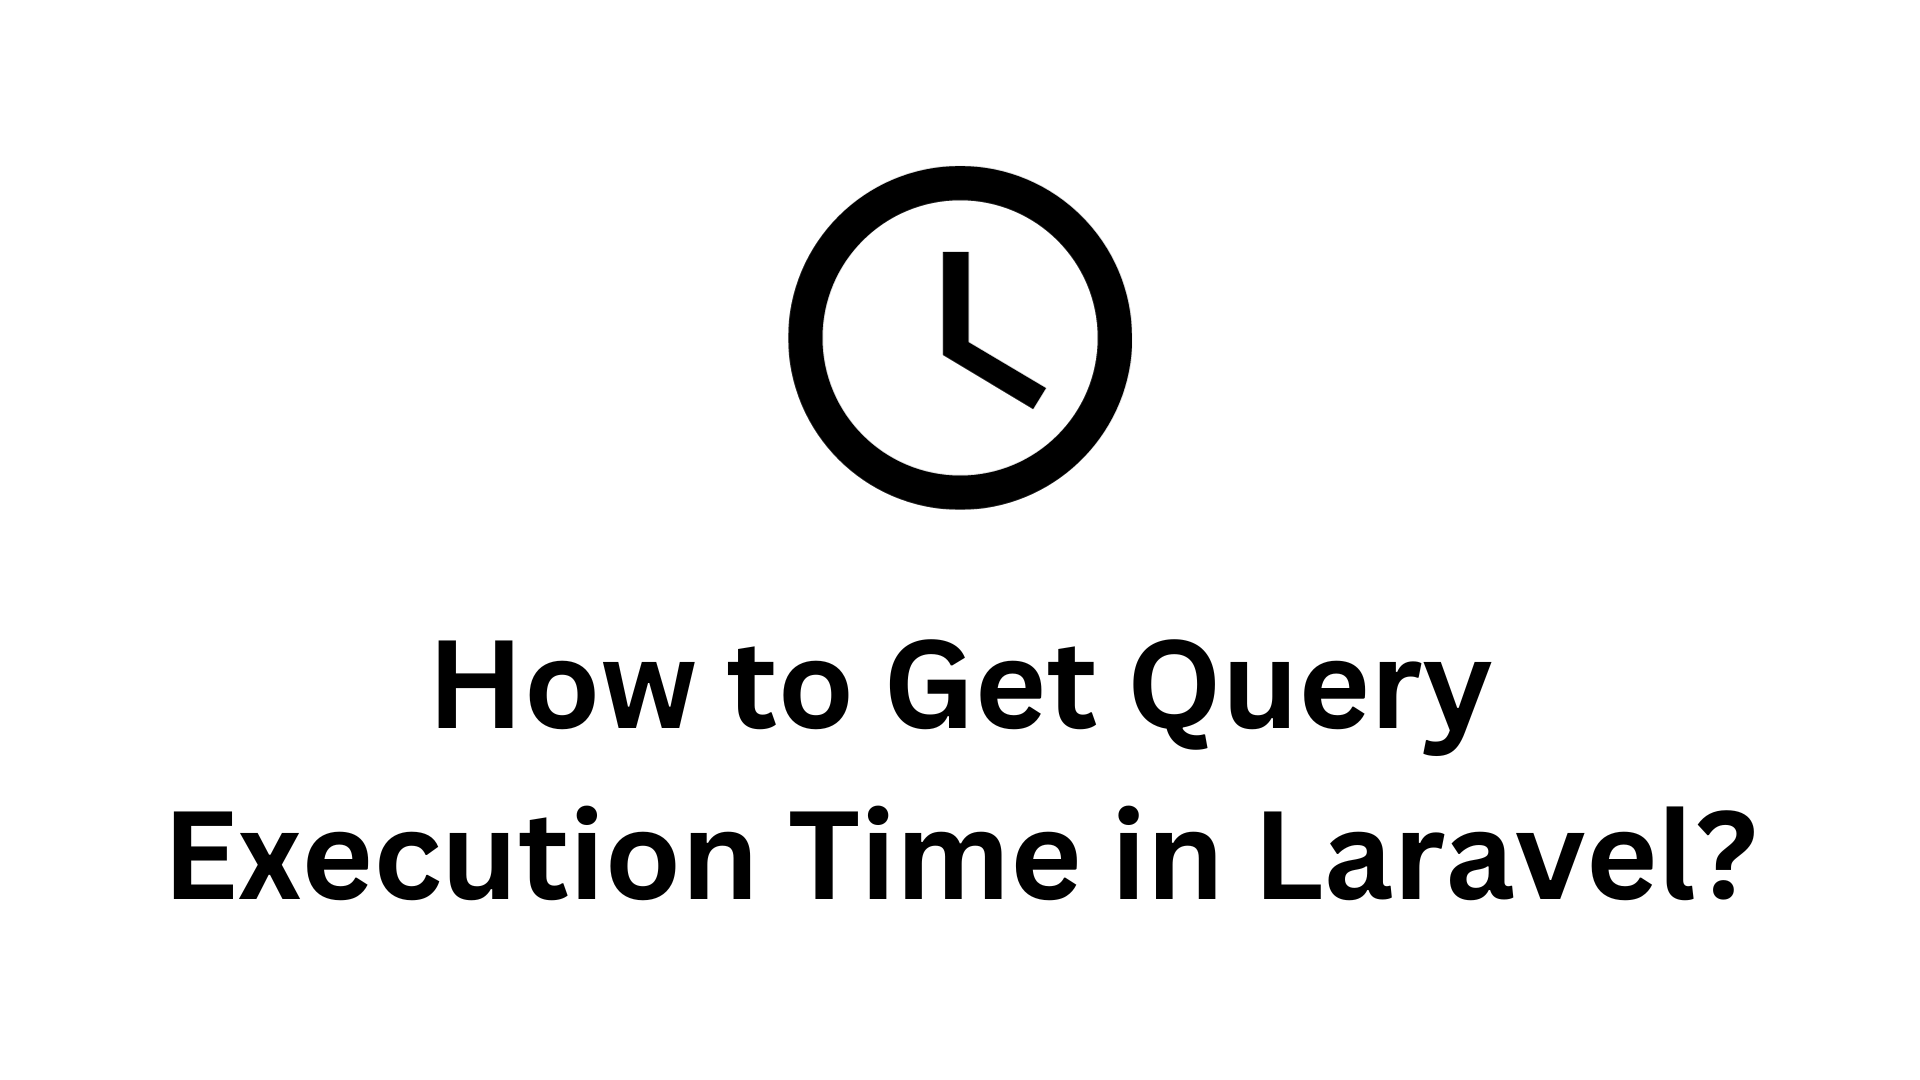 How to Get Query Execution Time in Laravel